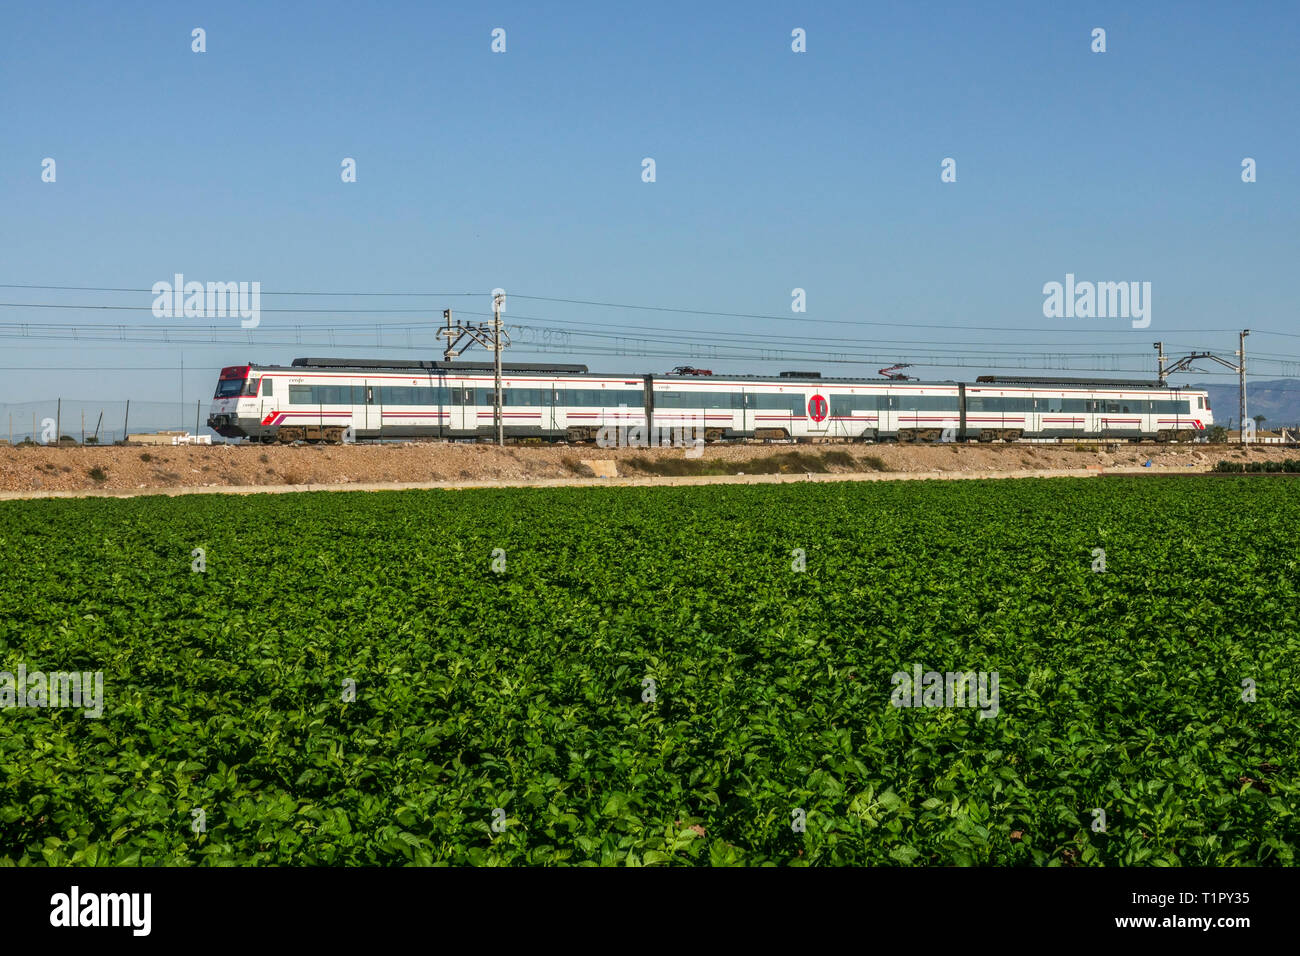 Cercanias - a train passing through an agricultural landscape with a potatoes field, Valencia Spain commuter train Stock Photo